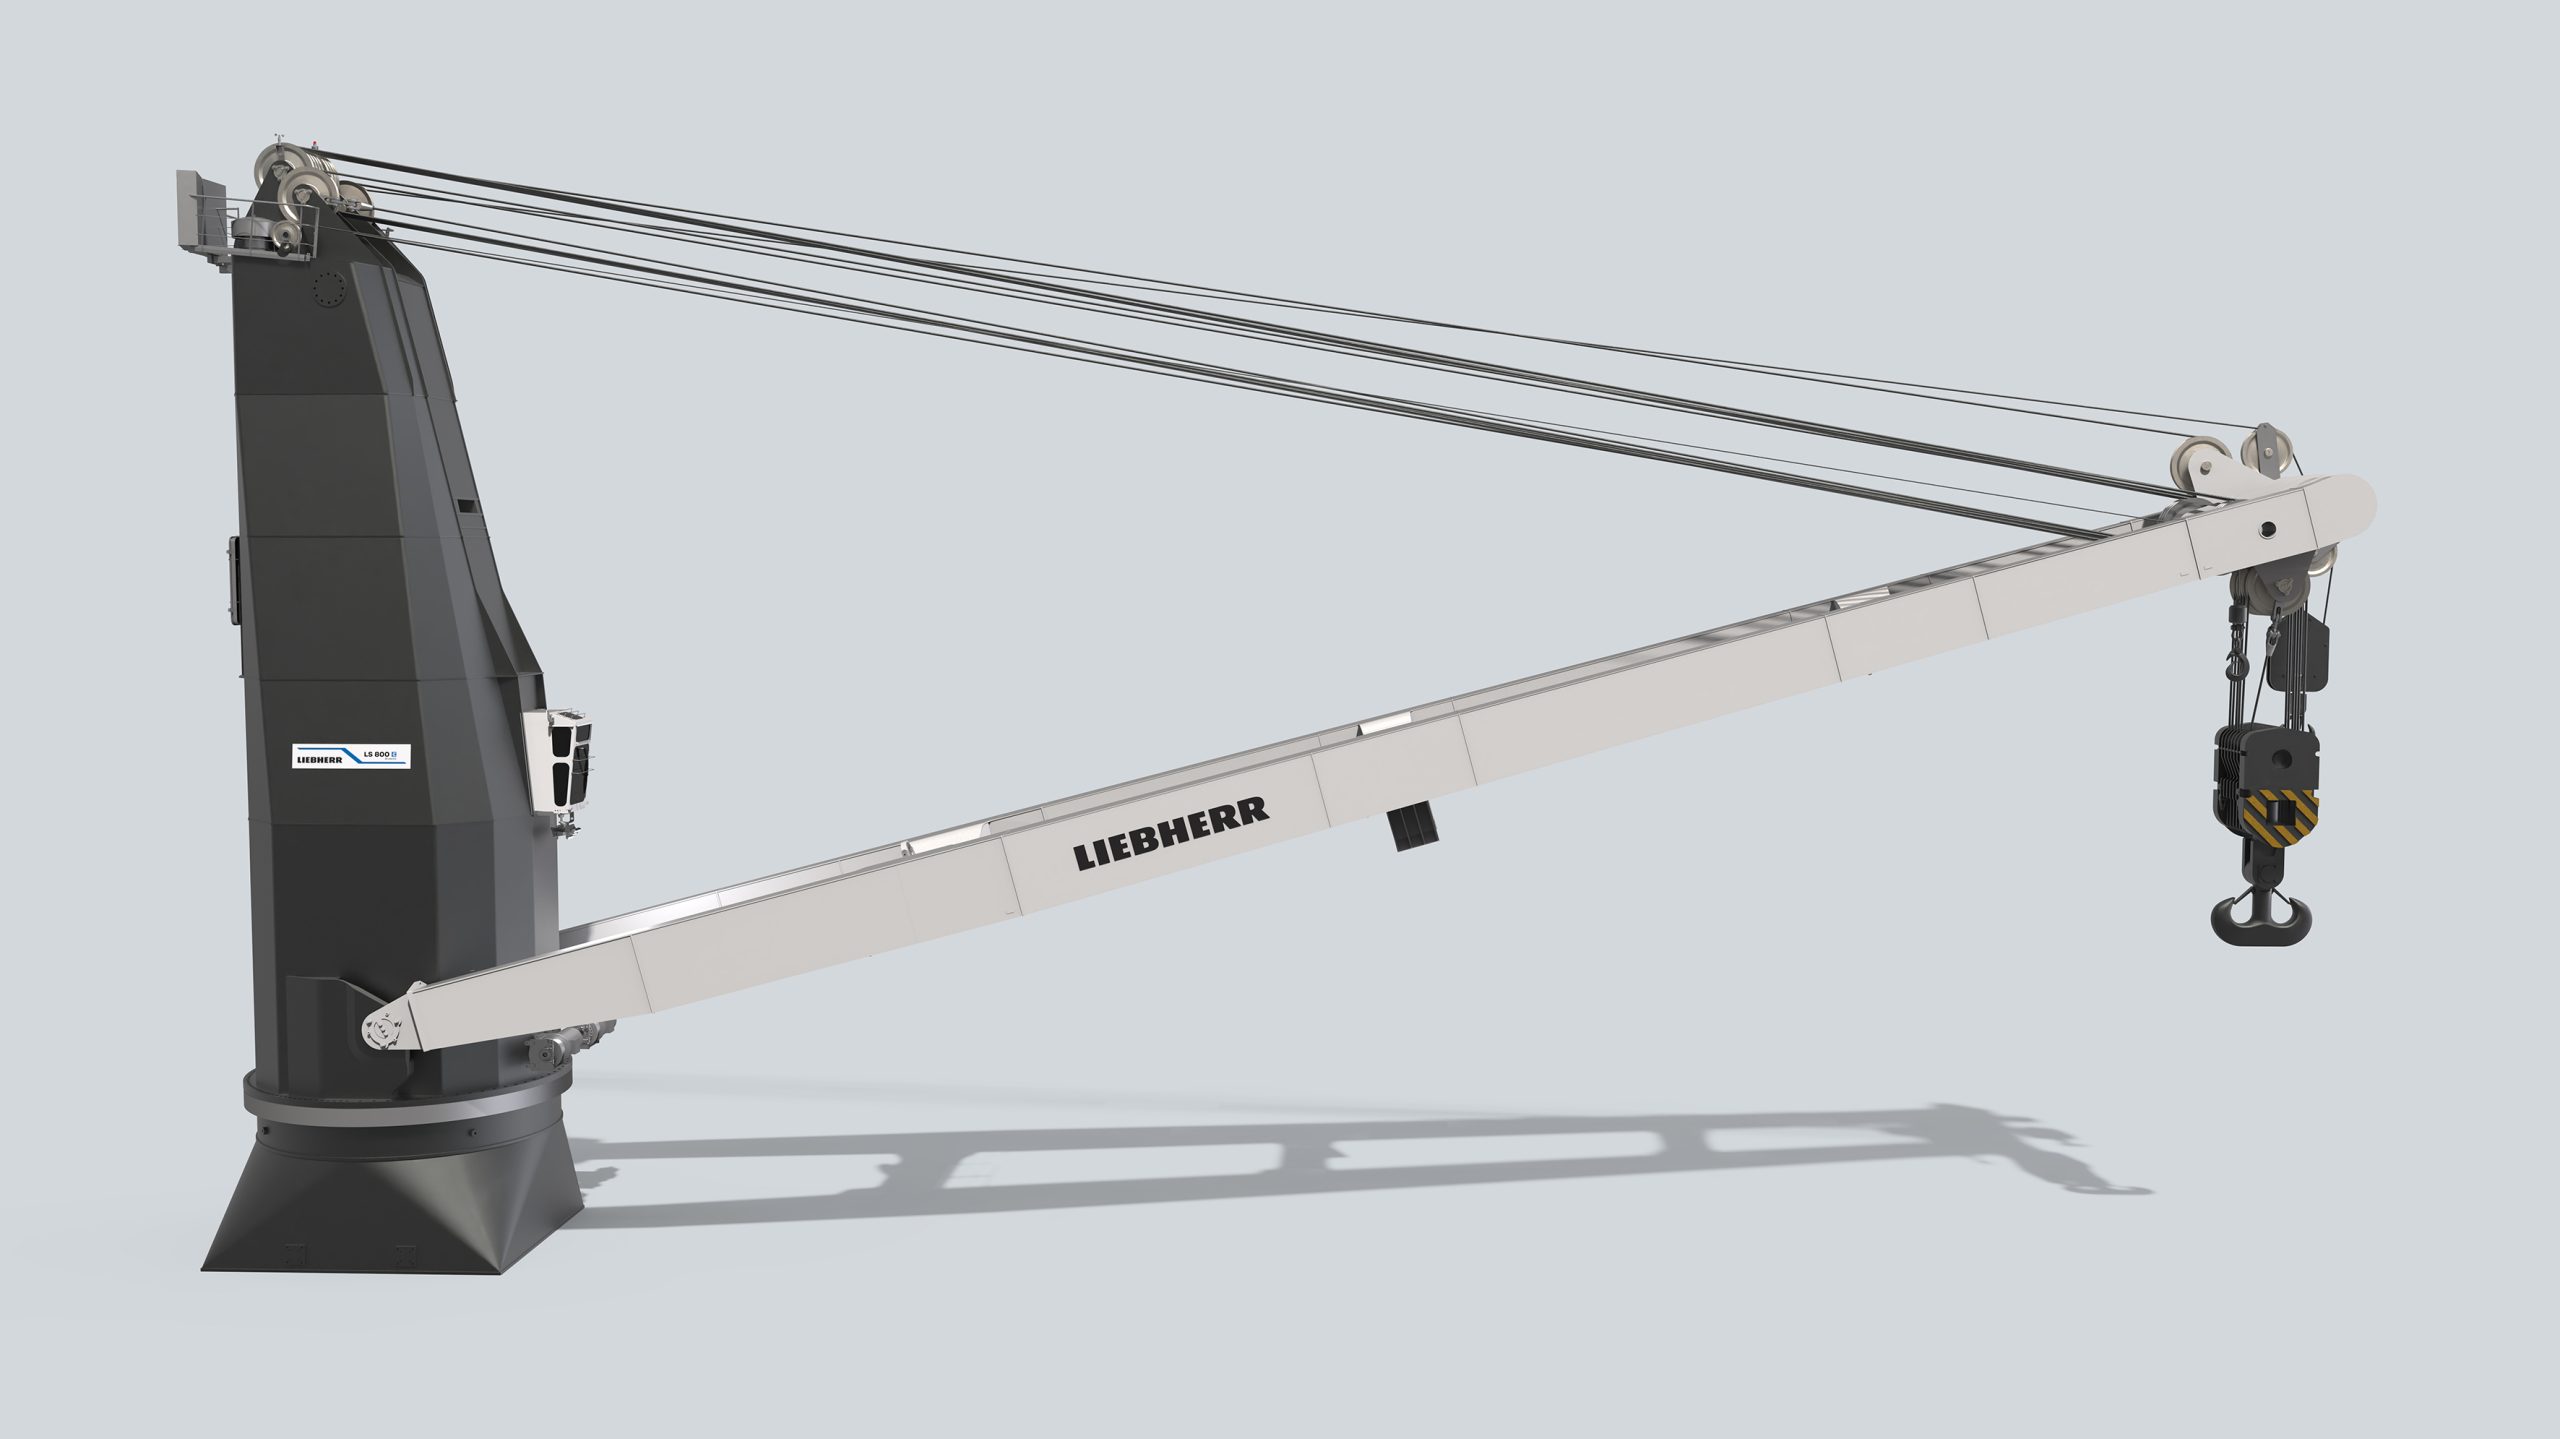 Liebherr electric cranes ordered for SAL-Jumbo Orca newbuilds